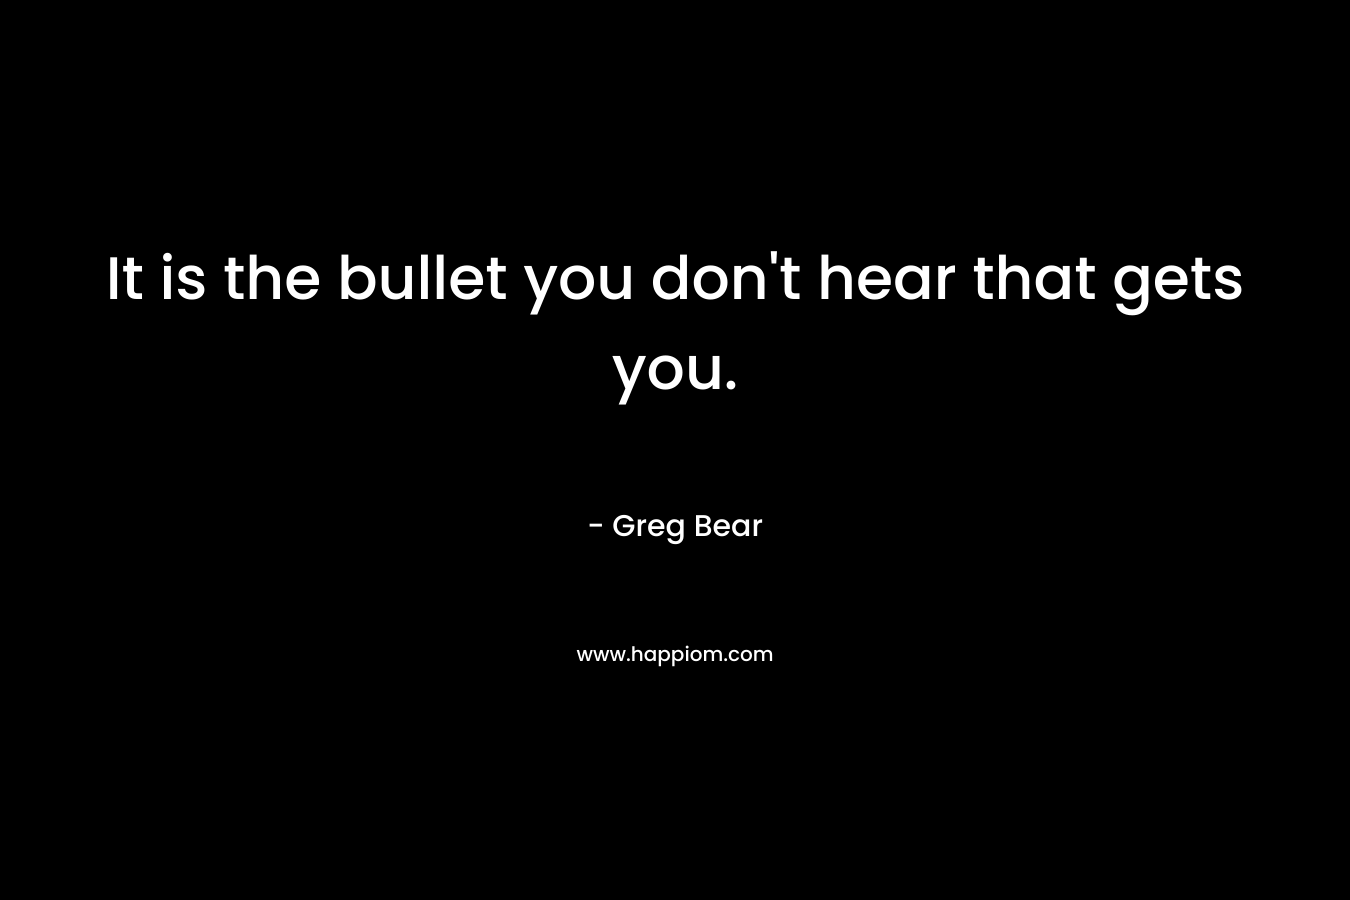 It is the bullet you don’t hear that gets you. – Greg Bear